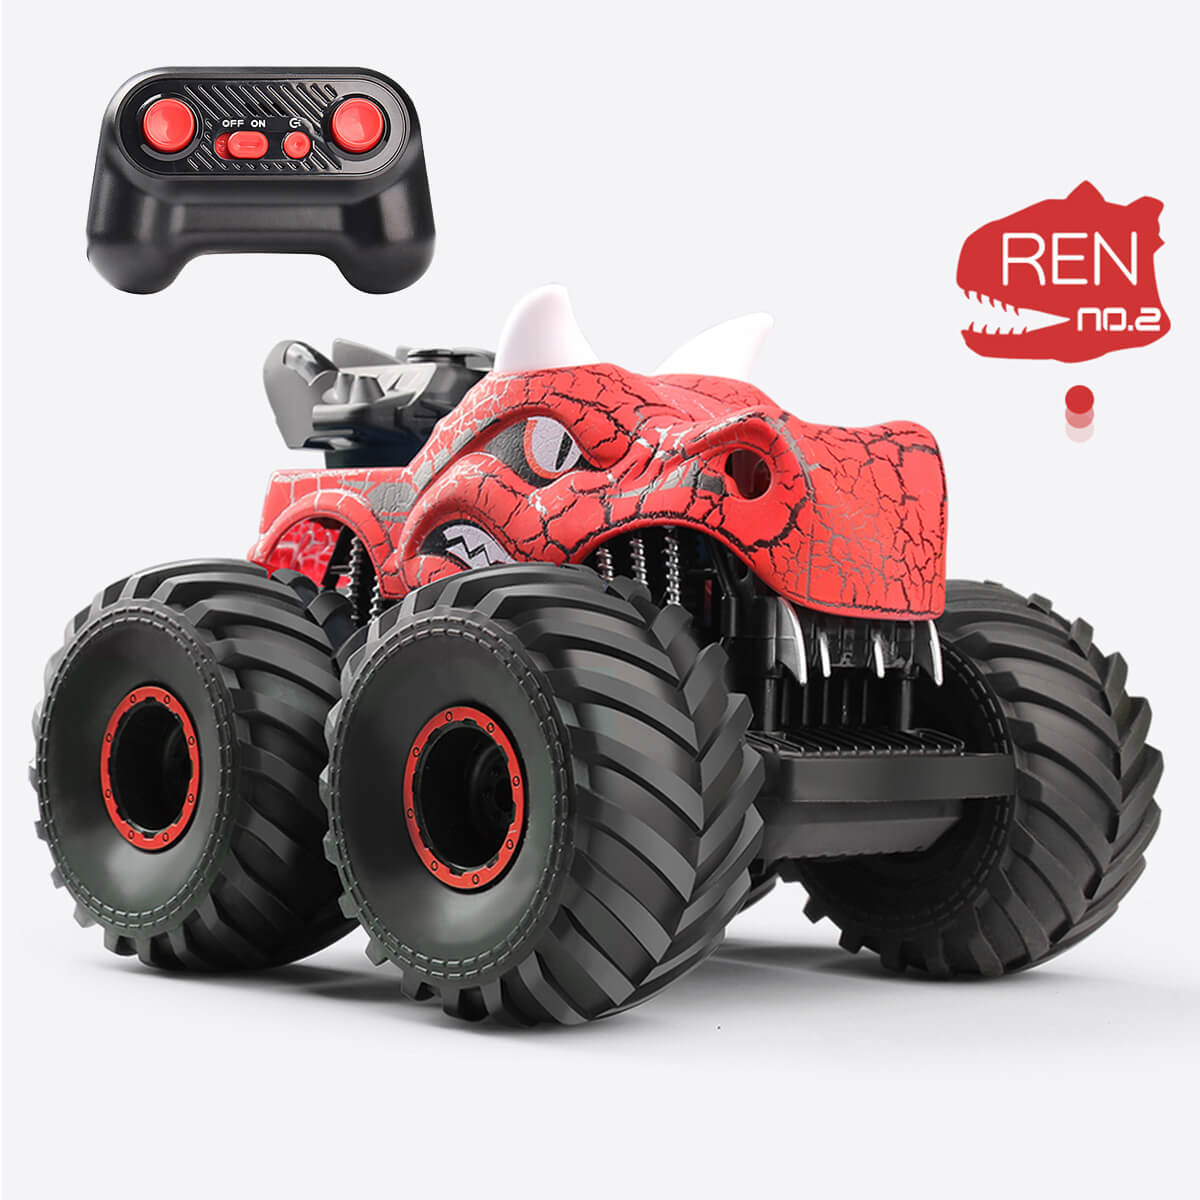 Kids RC Car Dinosaur Remote Control Car 2.4Ghz Stunt Car with Lights Sound and Spray Function